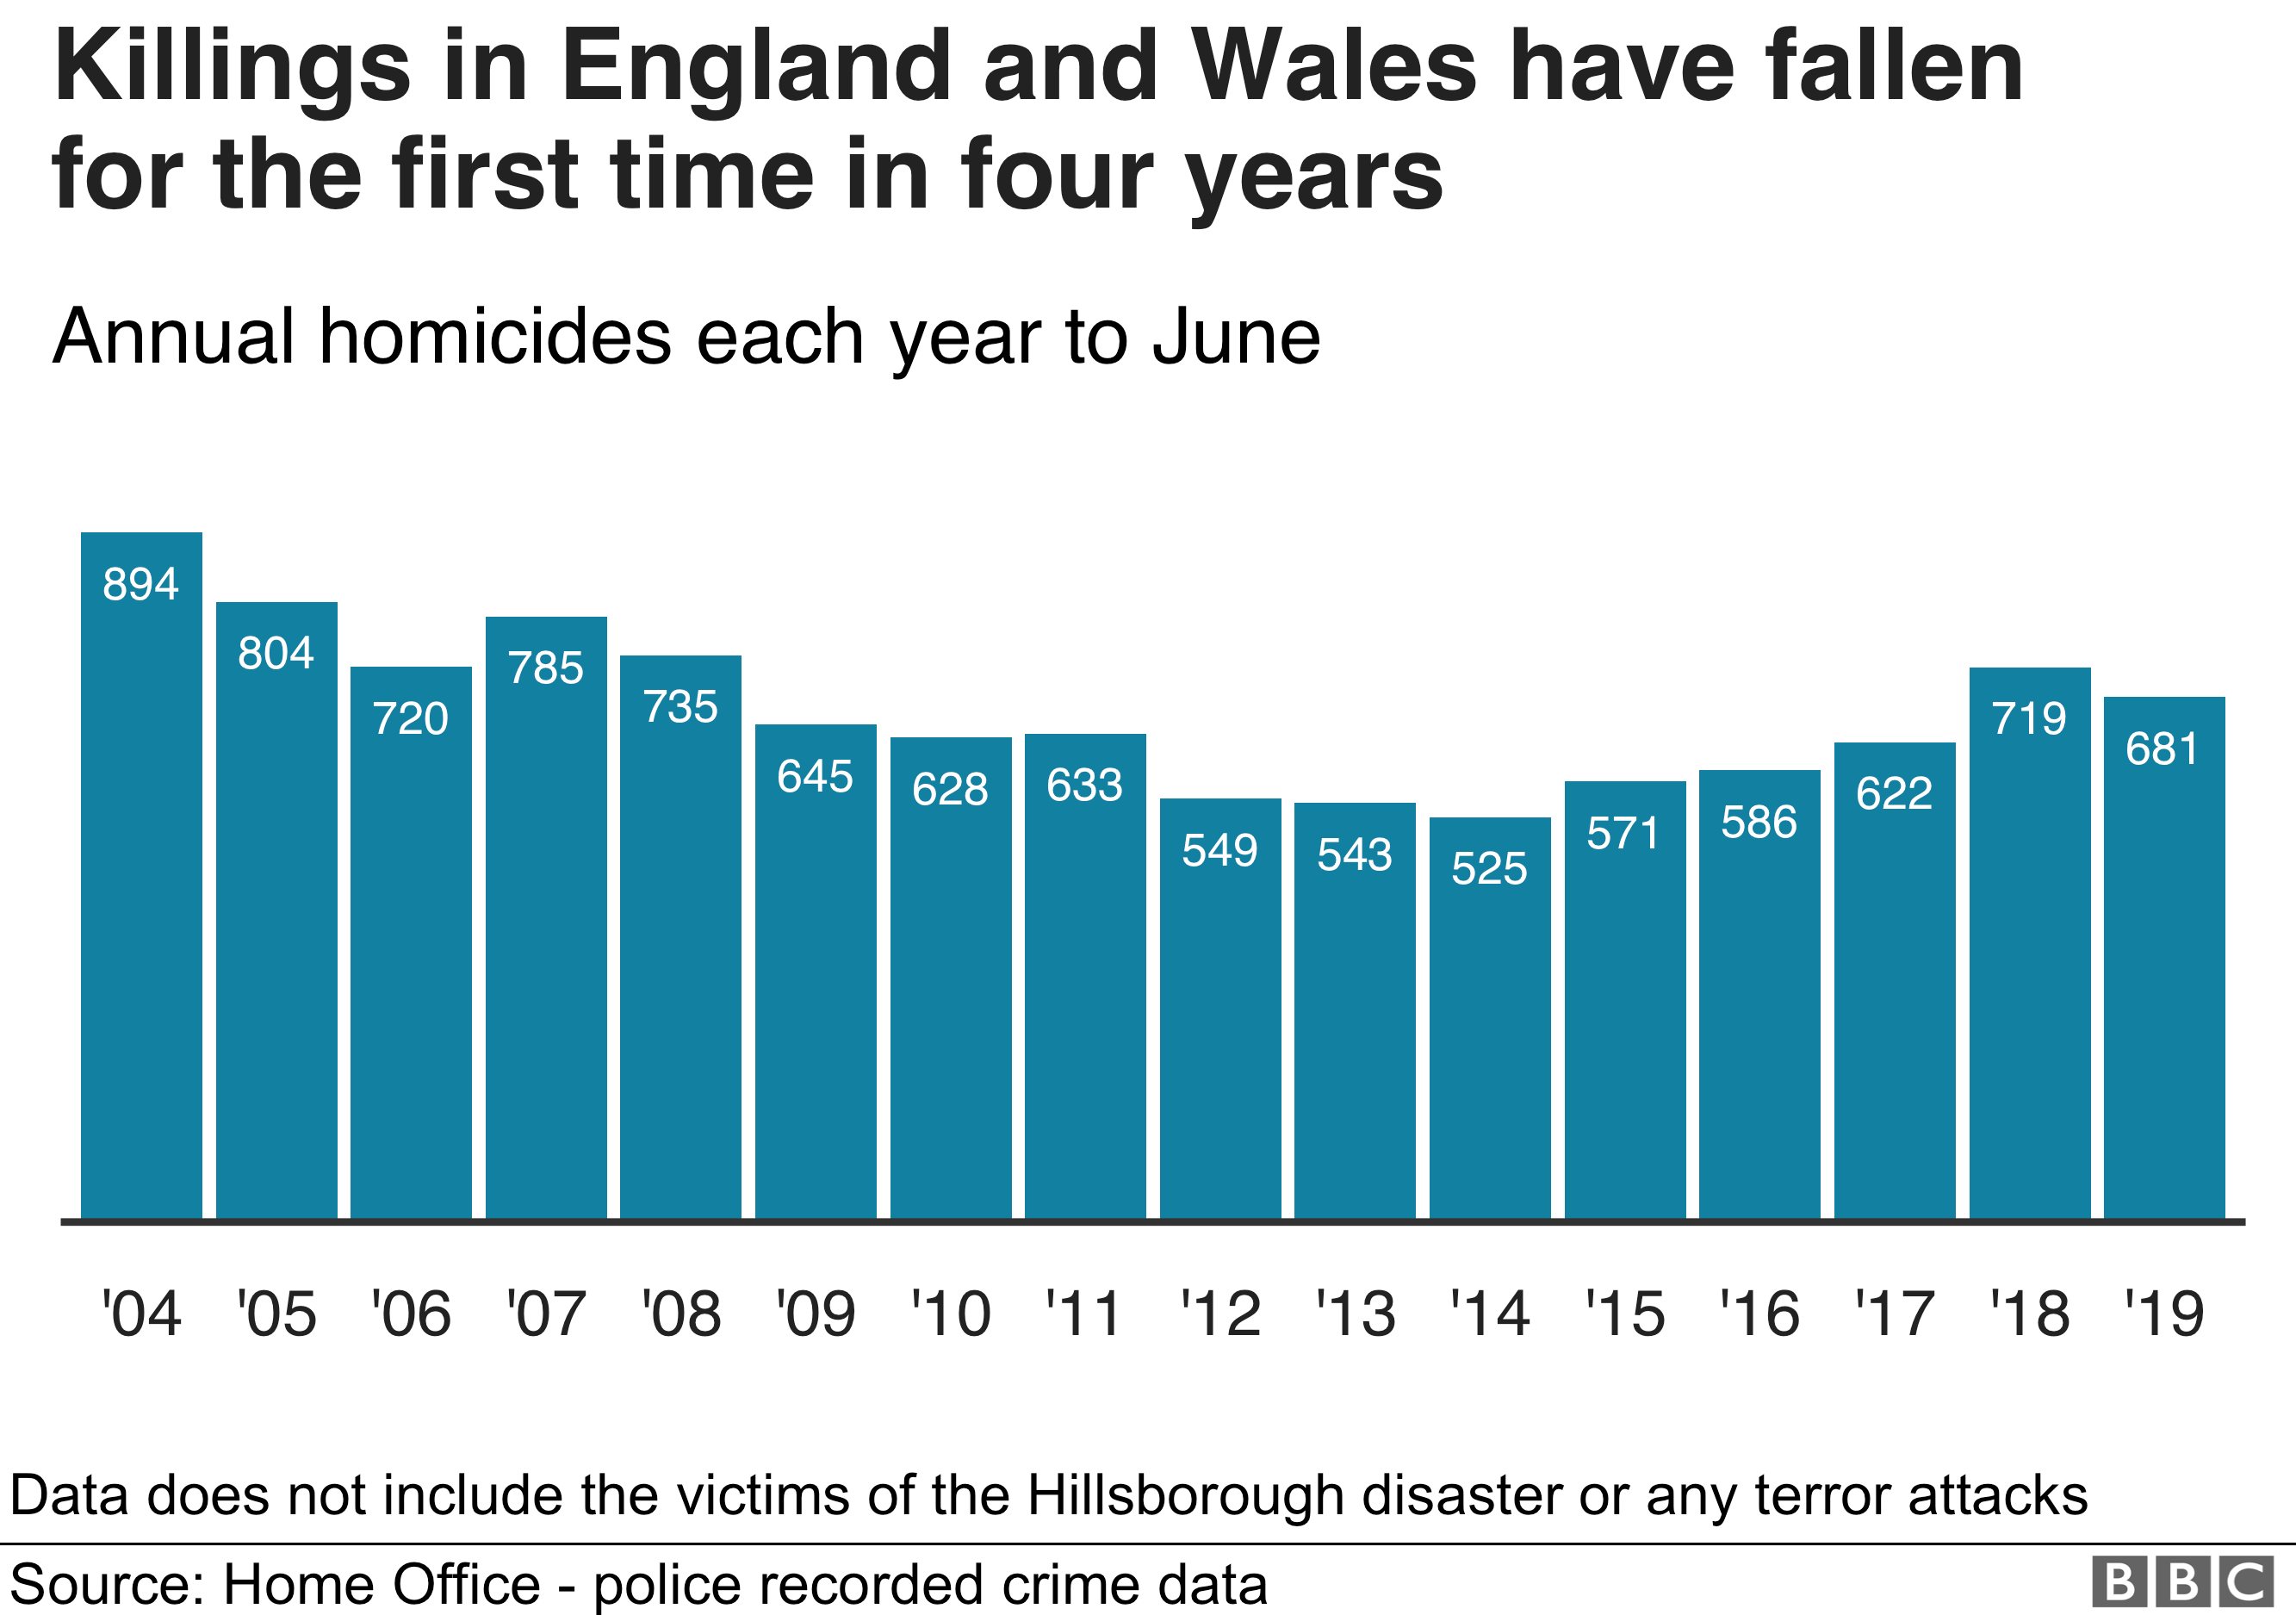 Graph showing killings in England and Wales have fallen for the first time in four years